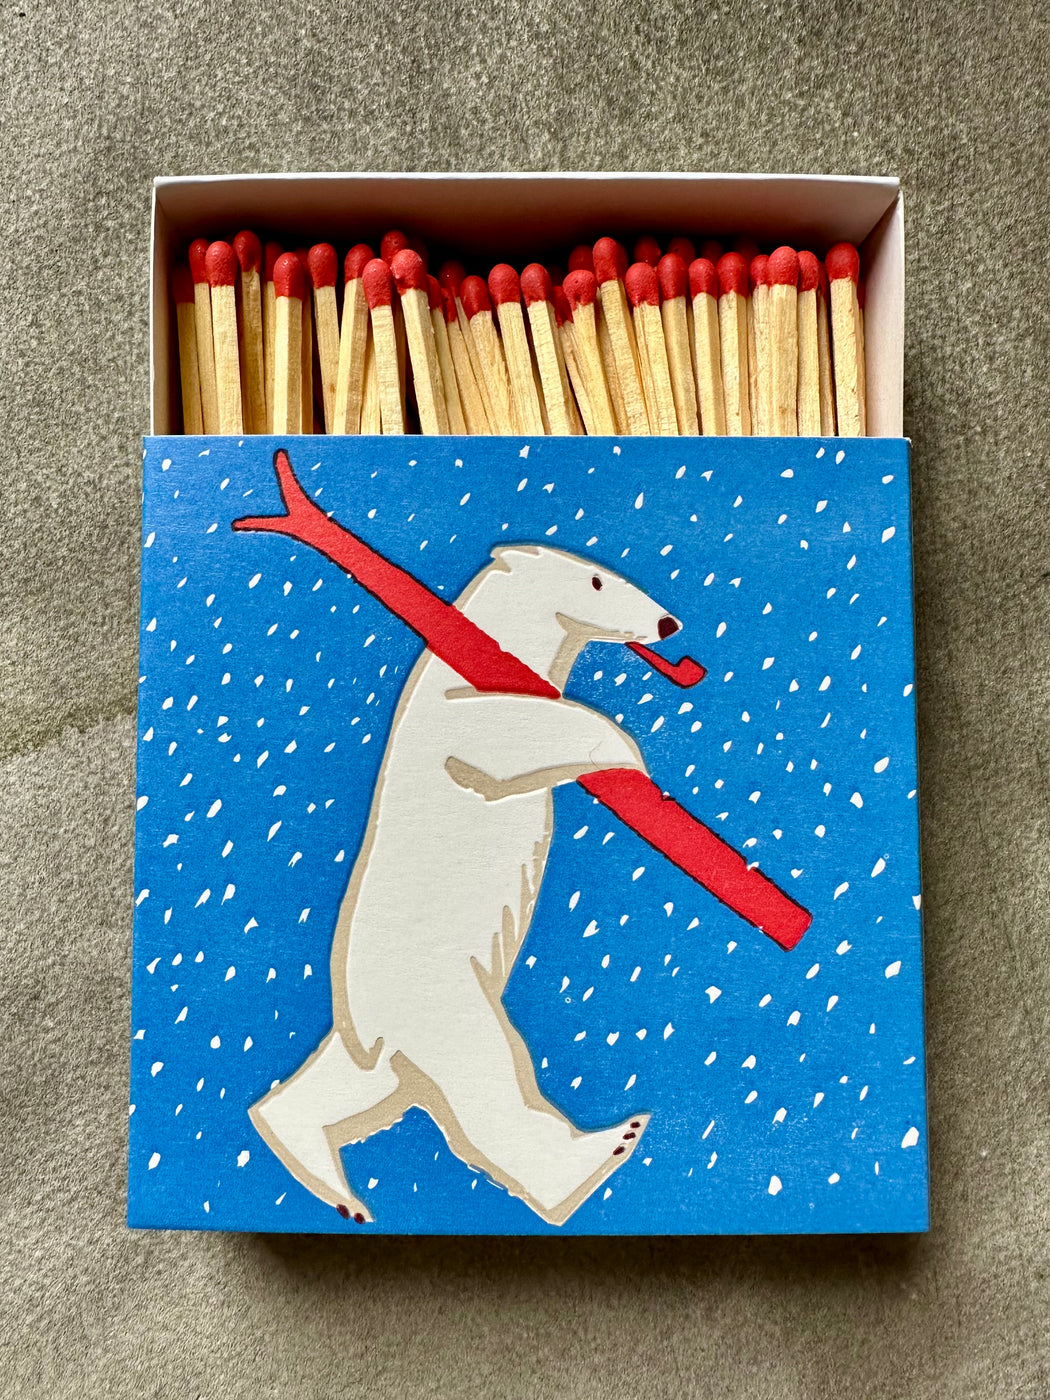 "Polar Bear" Matches by Archivist Gallery